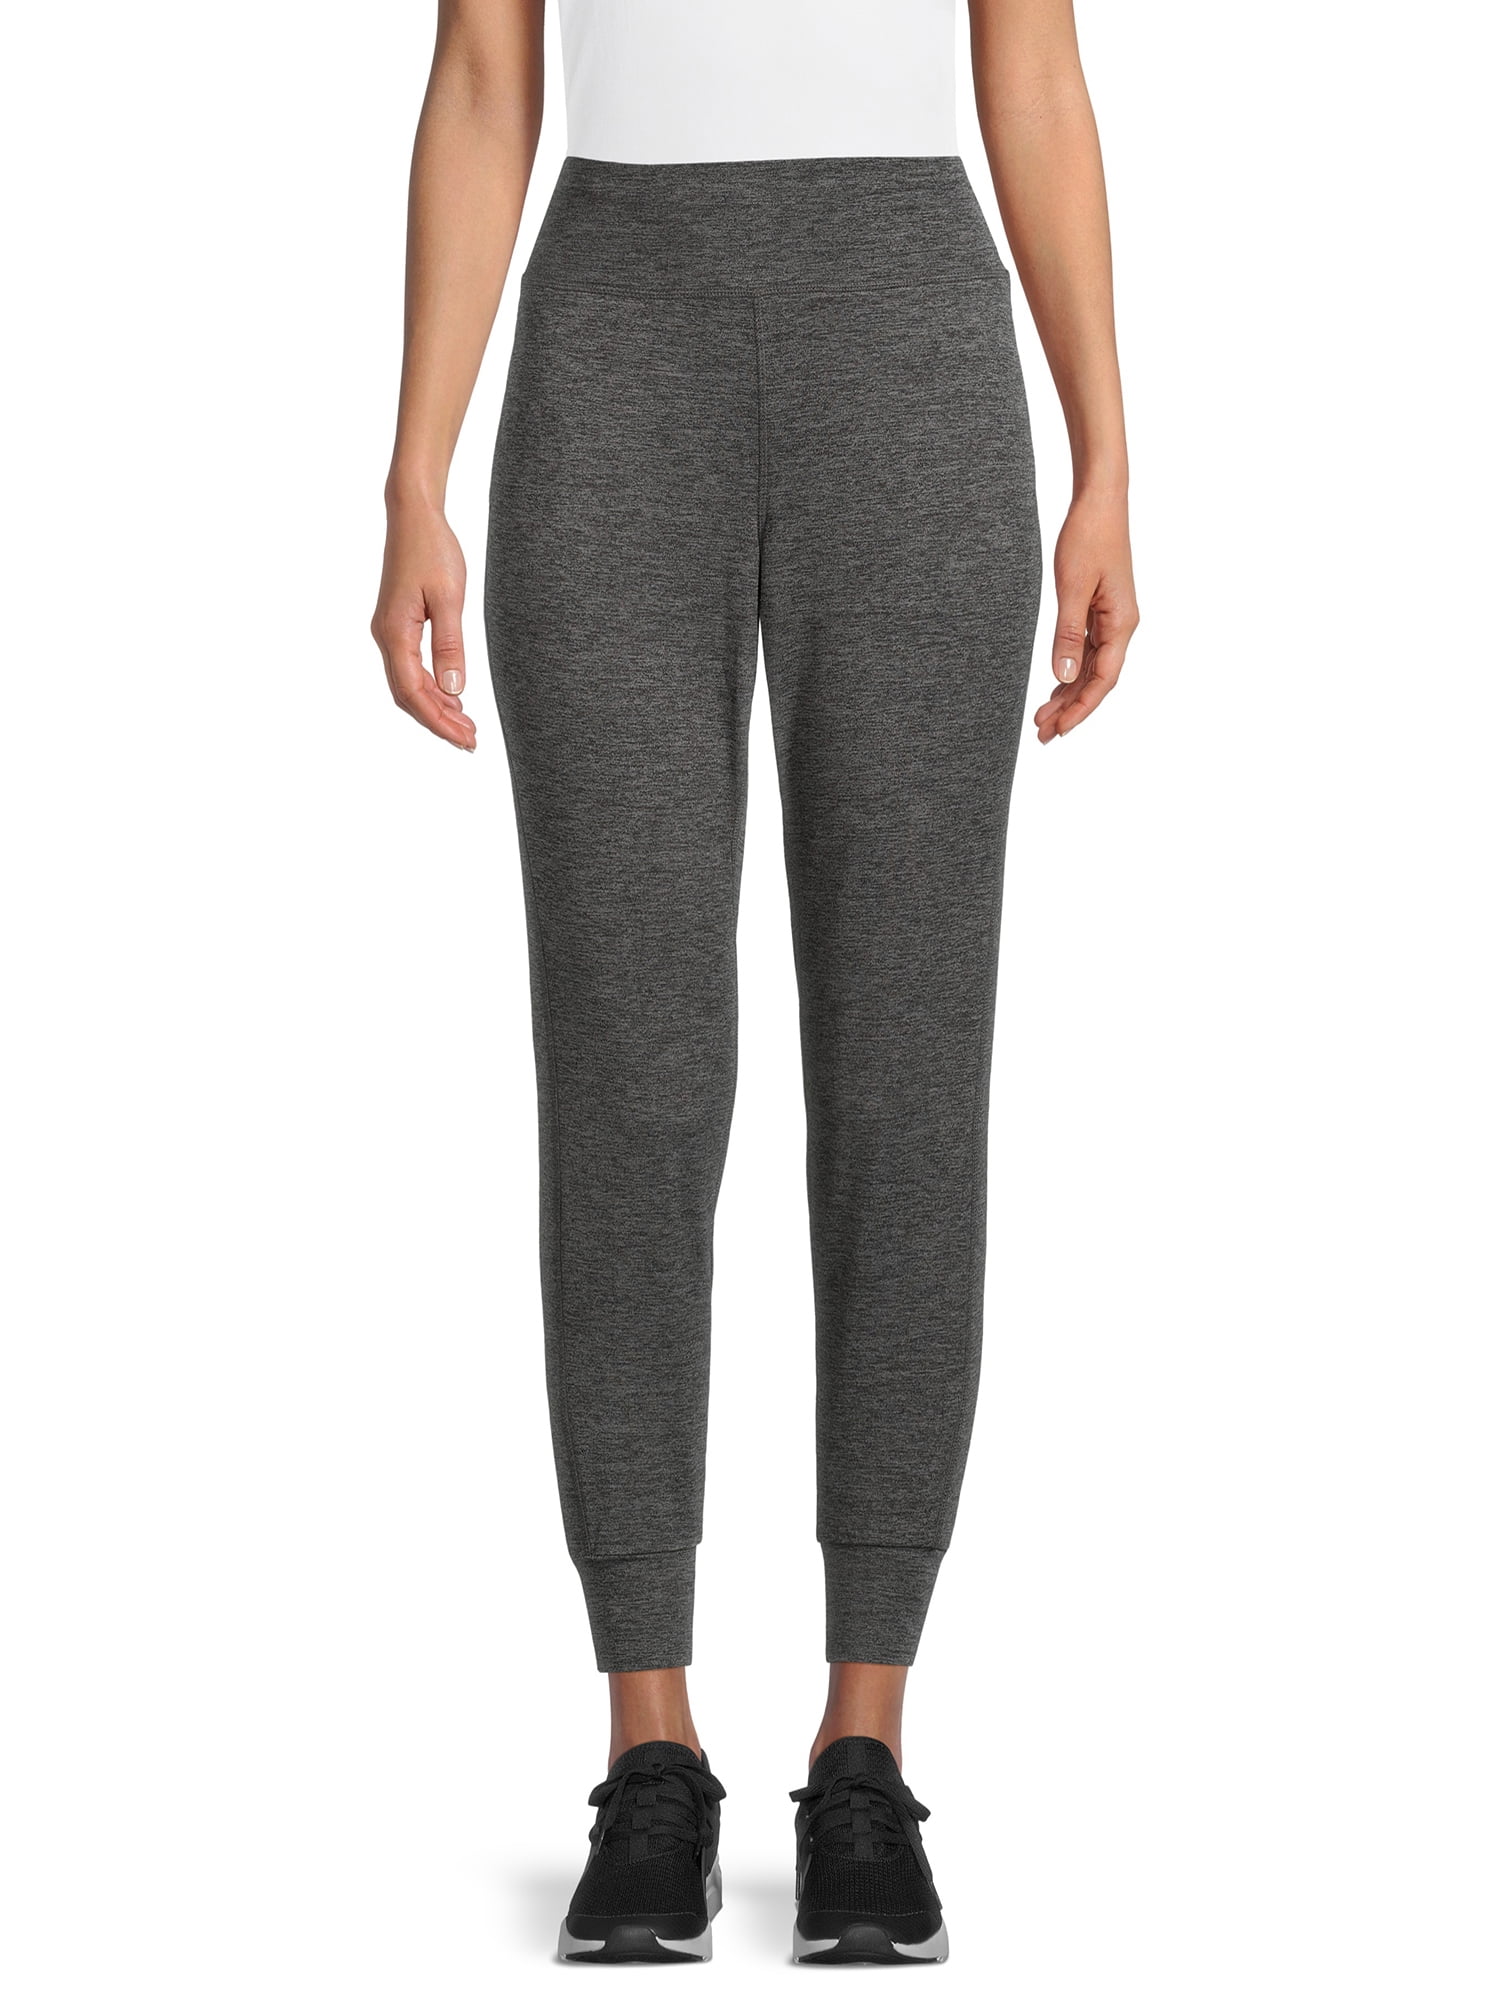 Athletic Works Women's Plus Super Soft Light Weight Jogger 